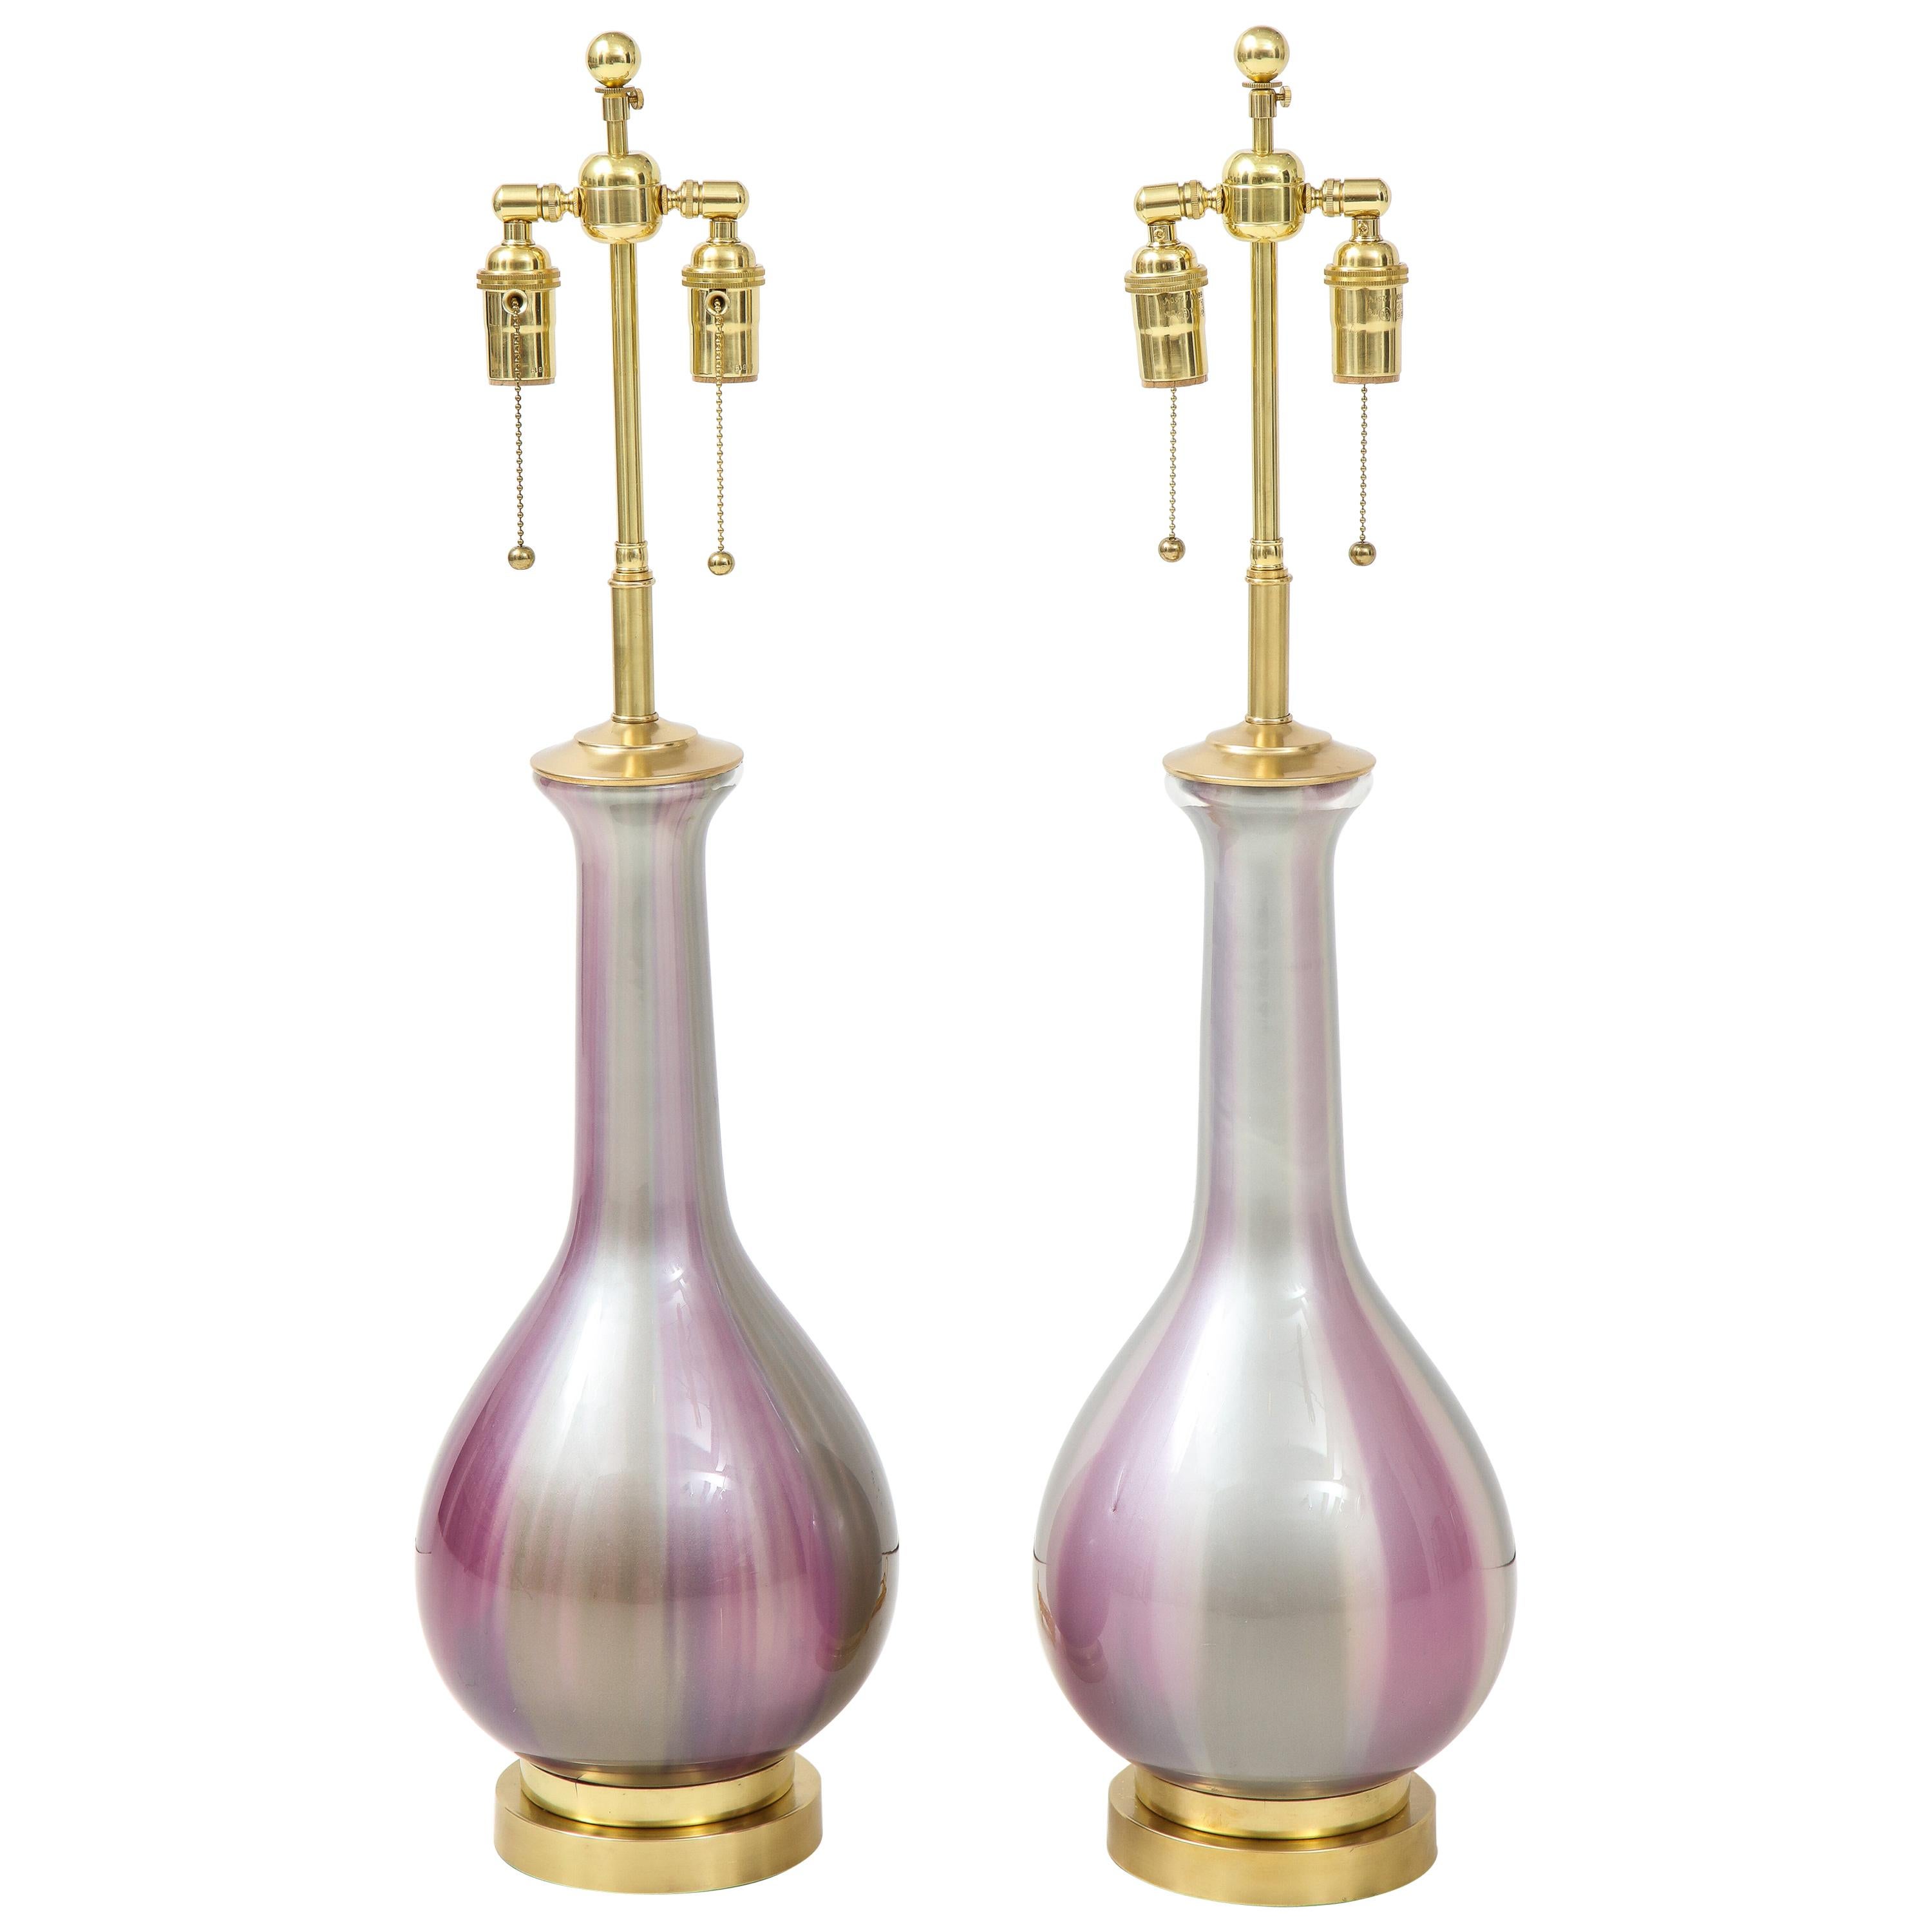 Pair of Iridescent Lamps by Frederick Cooper